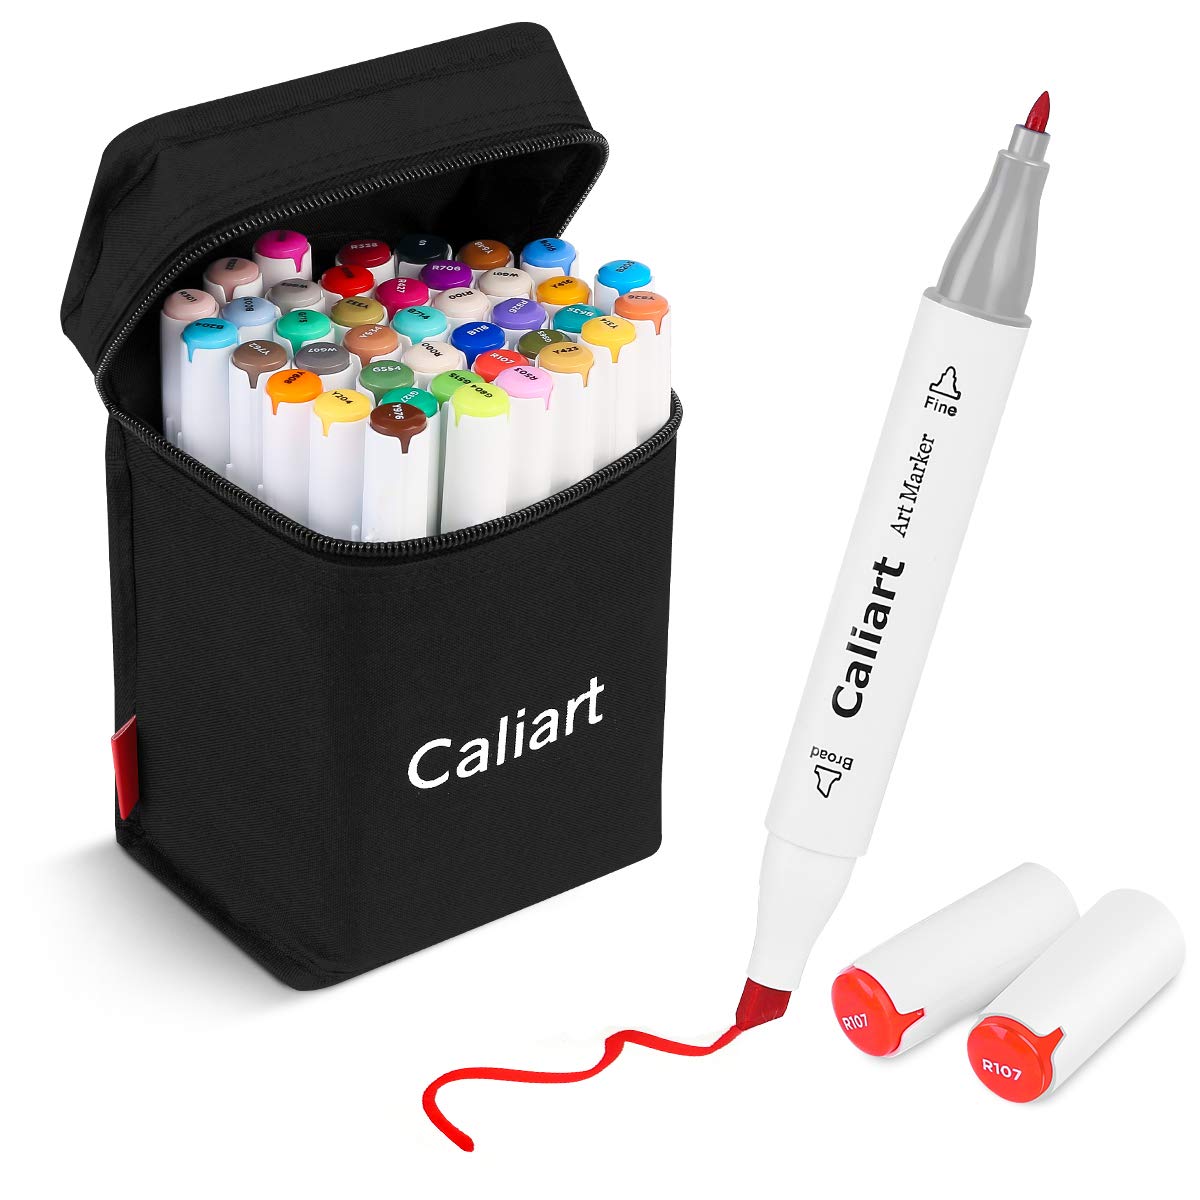 Caliart 41 Colors Dual Tip Art Markers Permanent Alcohol Based Markers Colored Artist Drawing Marker Pens Highlighters With Case for Coloring Animation Illustration Painting Card Making Underlining